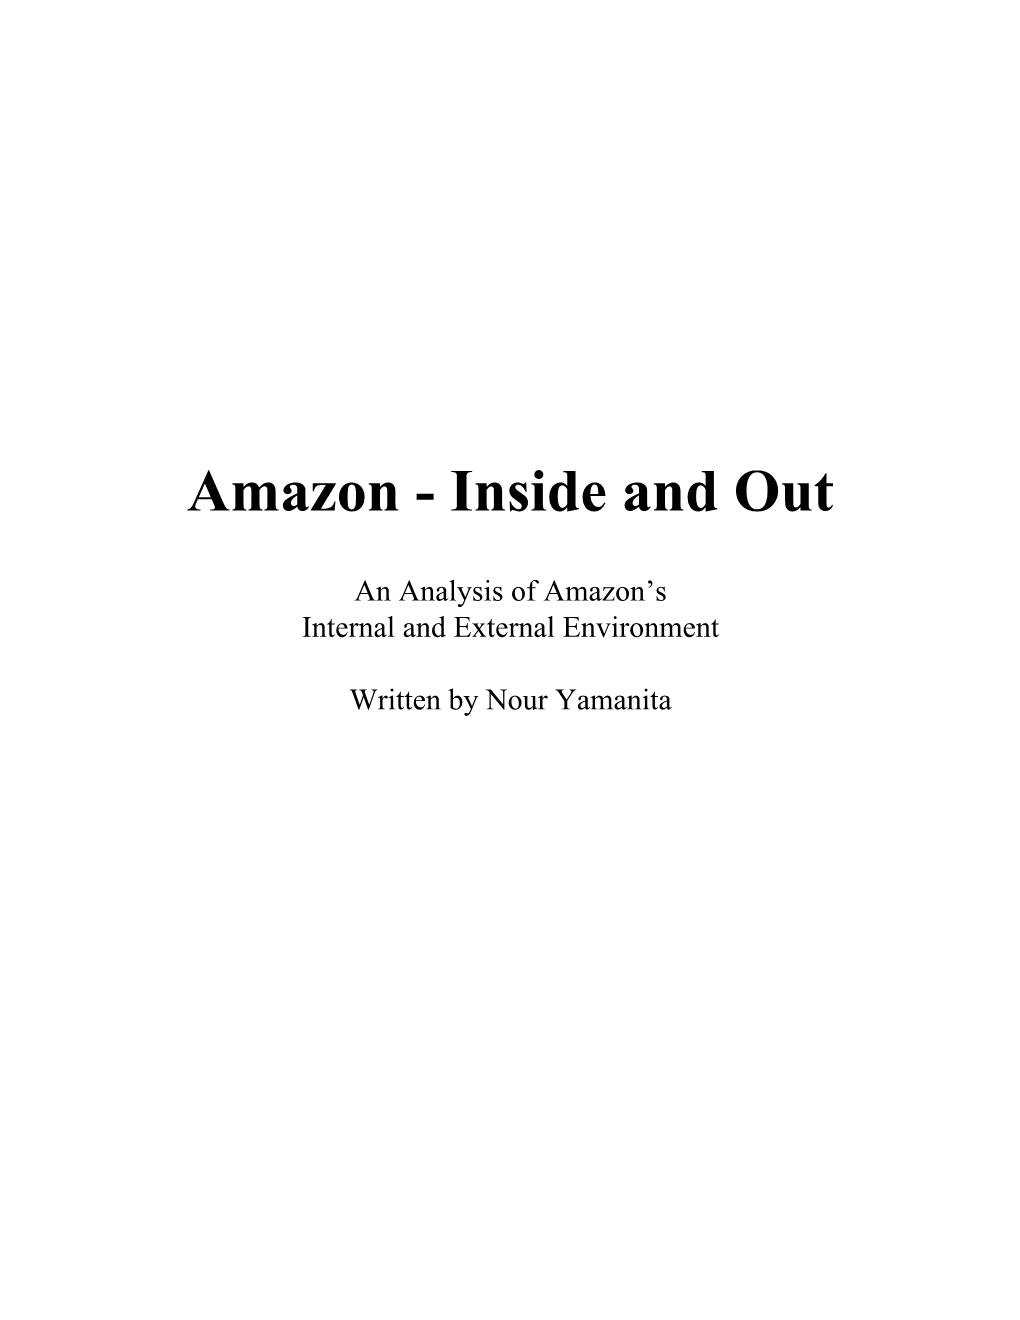 Amazon - Inside and Out